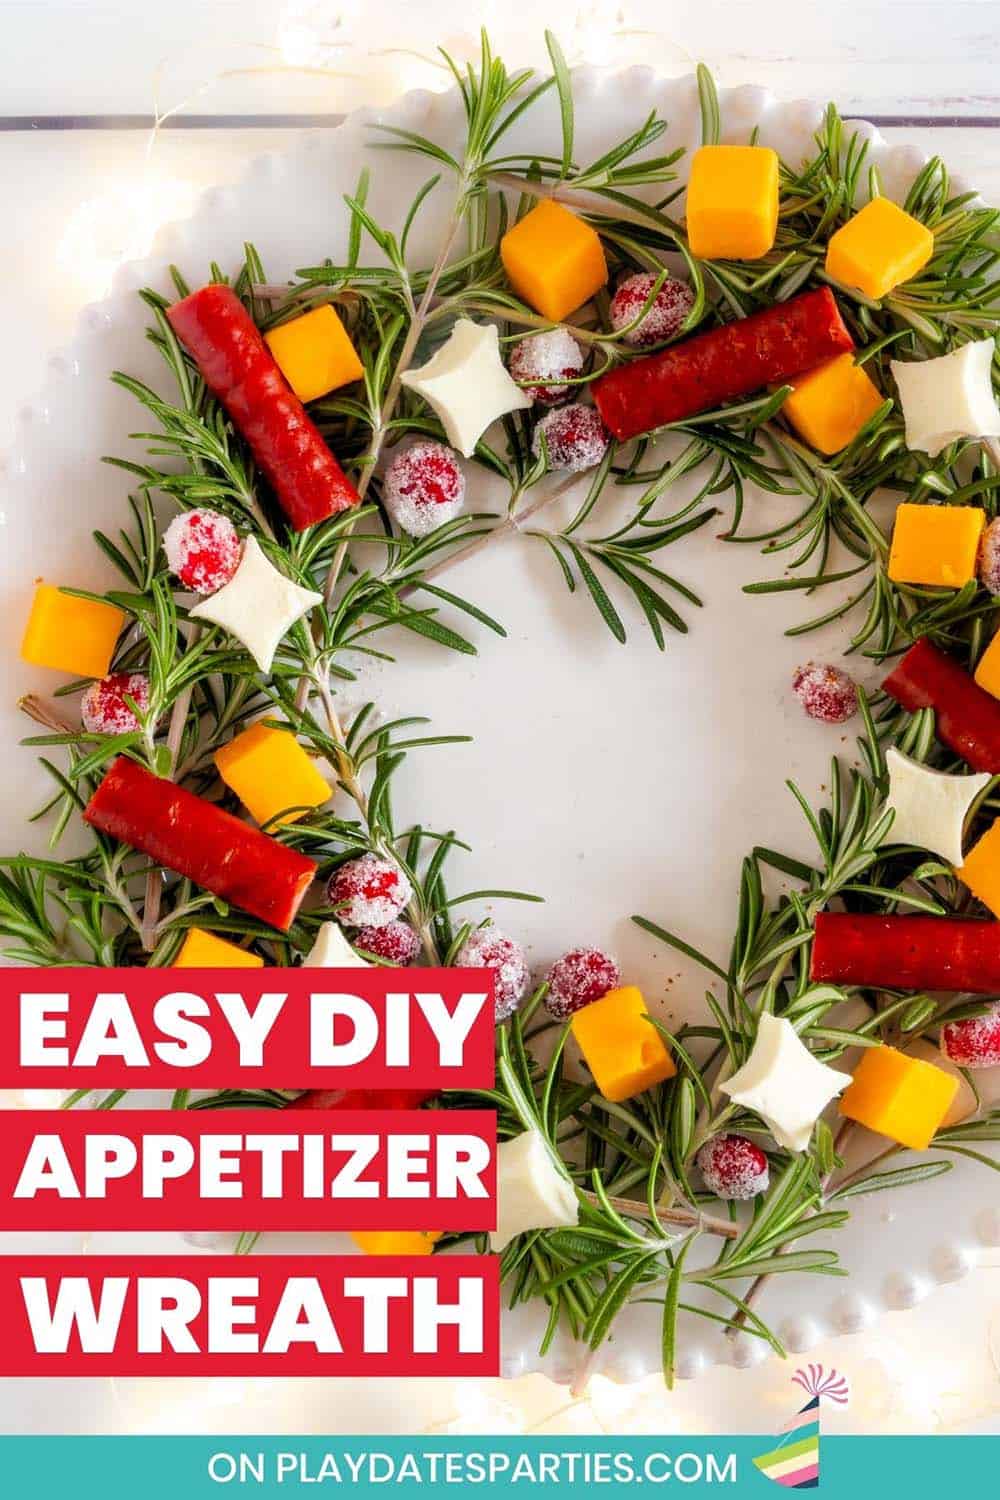 Cheese and meats on a circular bed of rosemary with the text easy DIY appetizer wreath.